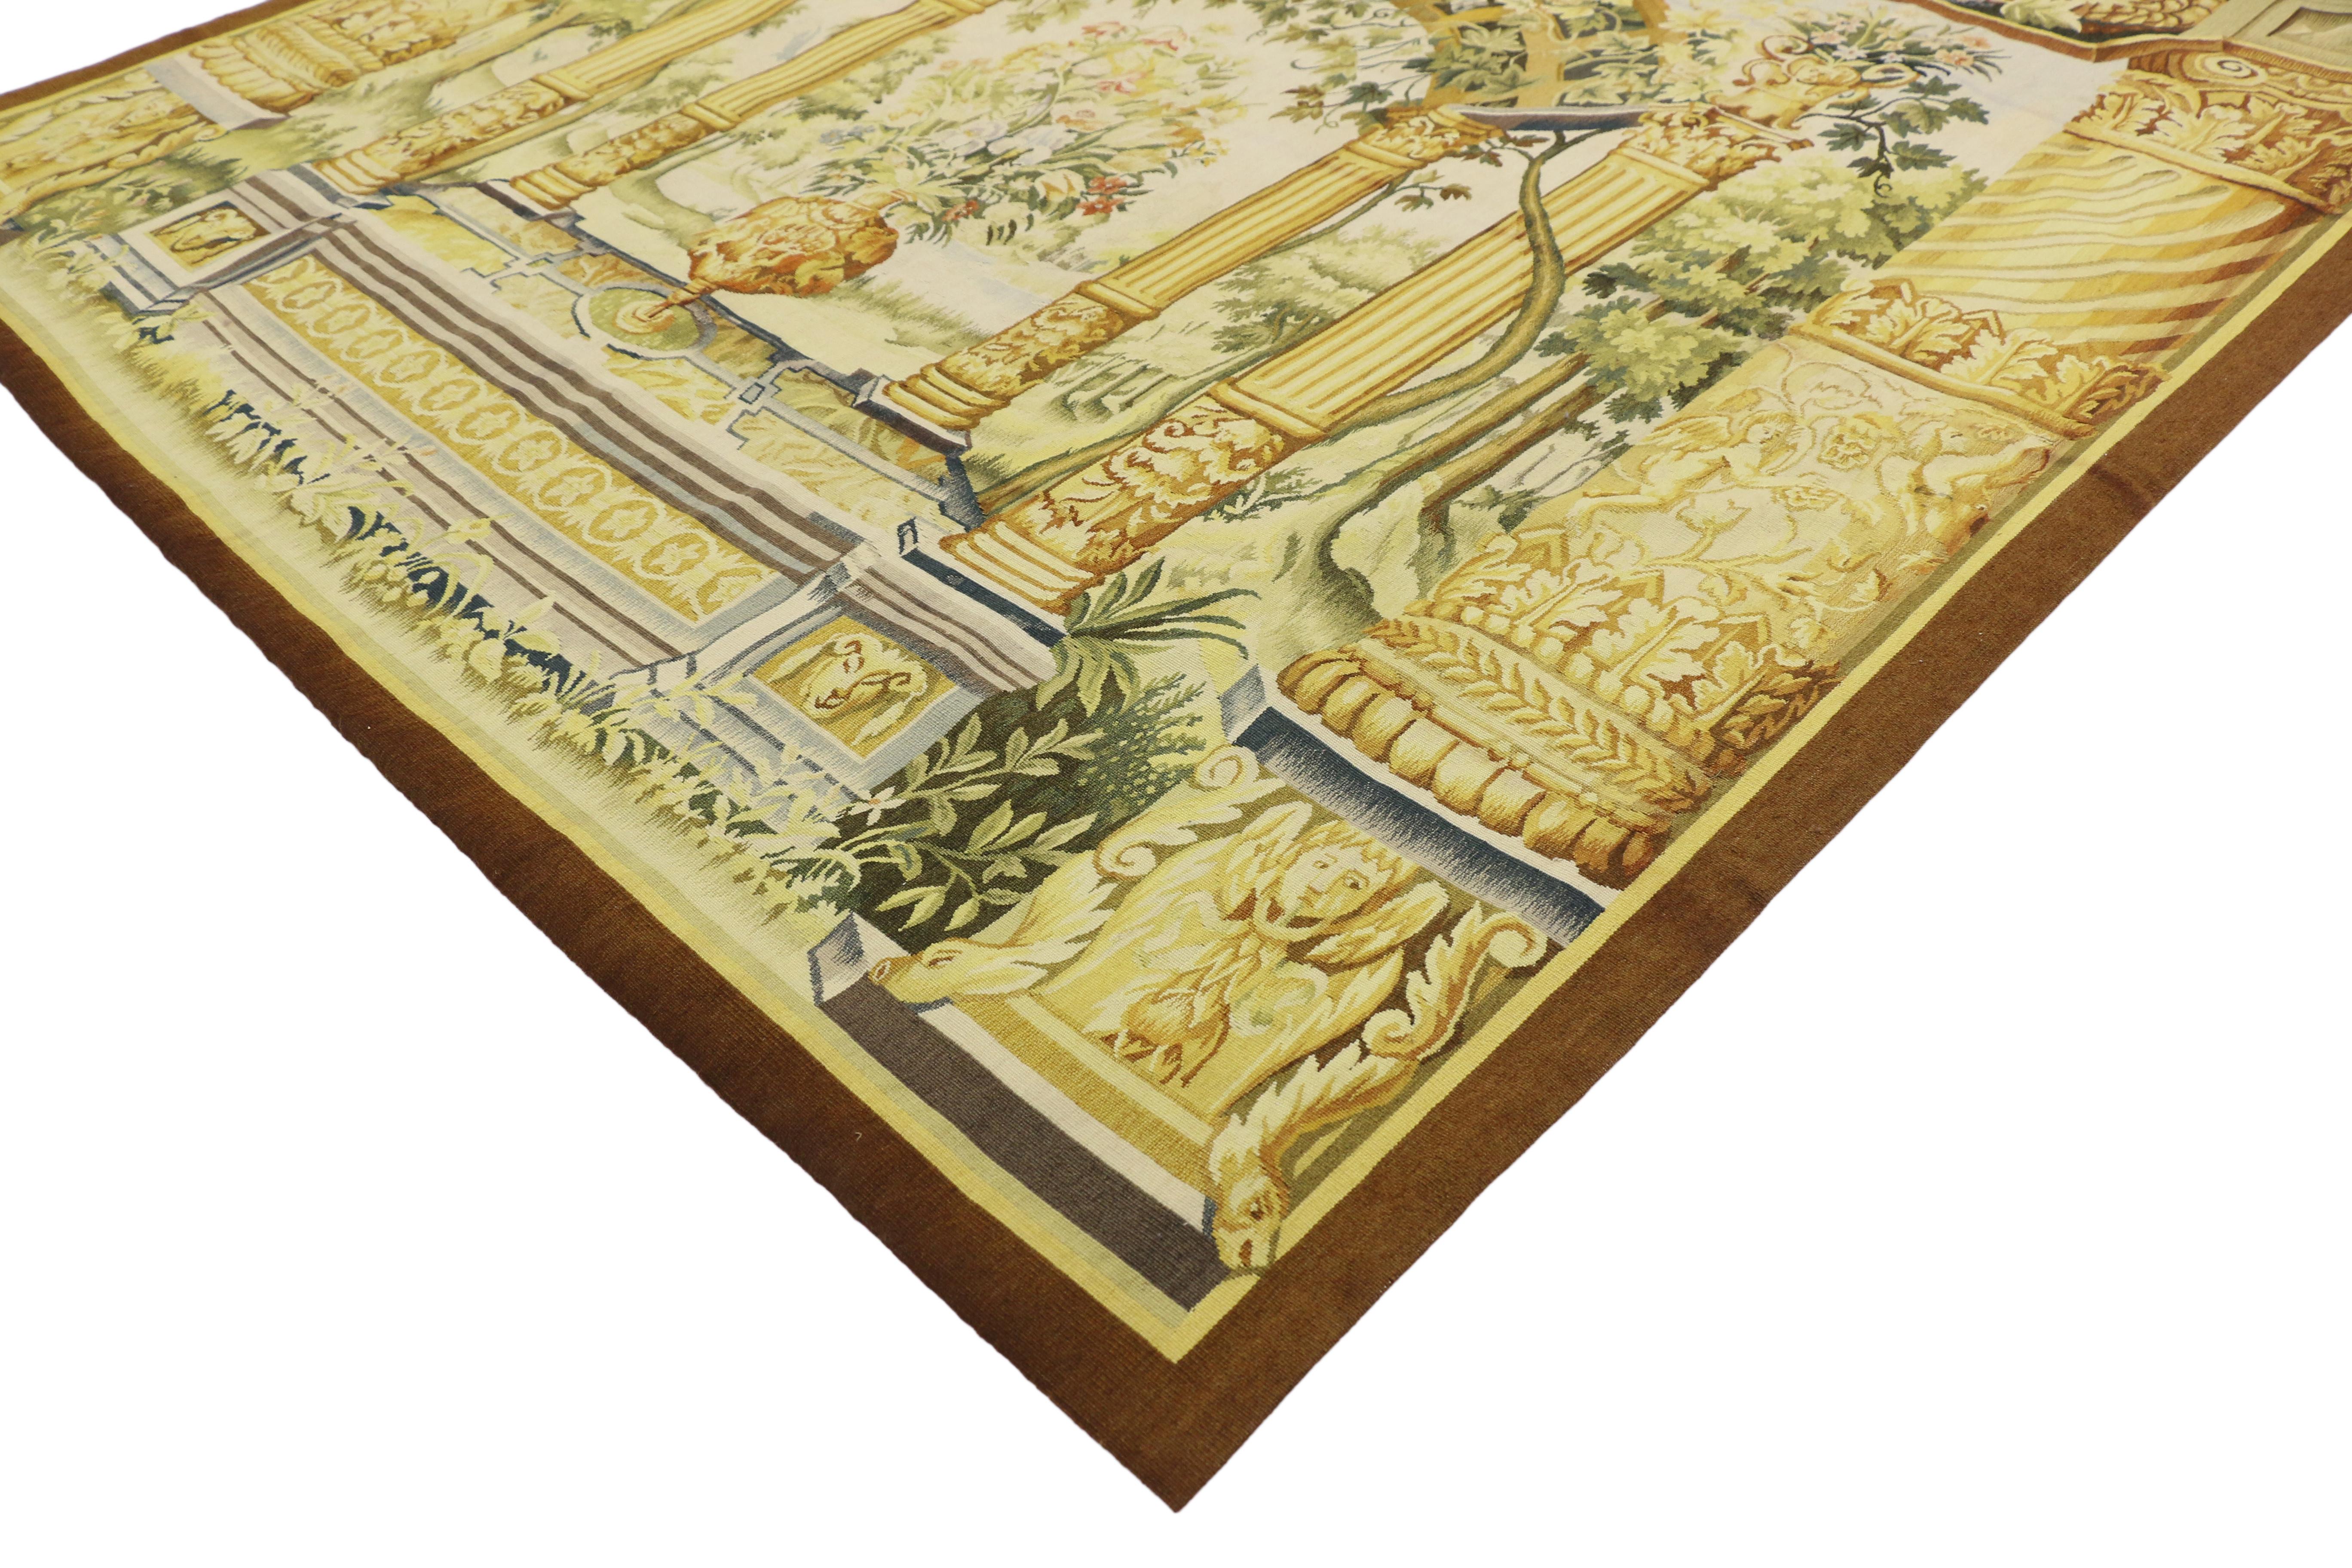 73698 Garden View Tapestry, Inspired by Jacob Wauters, Flemish Tapestry of a Pergola, Verdure Wall Hanging 05'03 x 05'07. Drawing inspiration from Jacob Wauters, the Manufacture of Antwerp, and Galleries and Garden Views, this garden tapestry